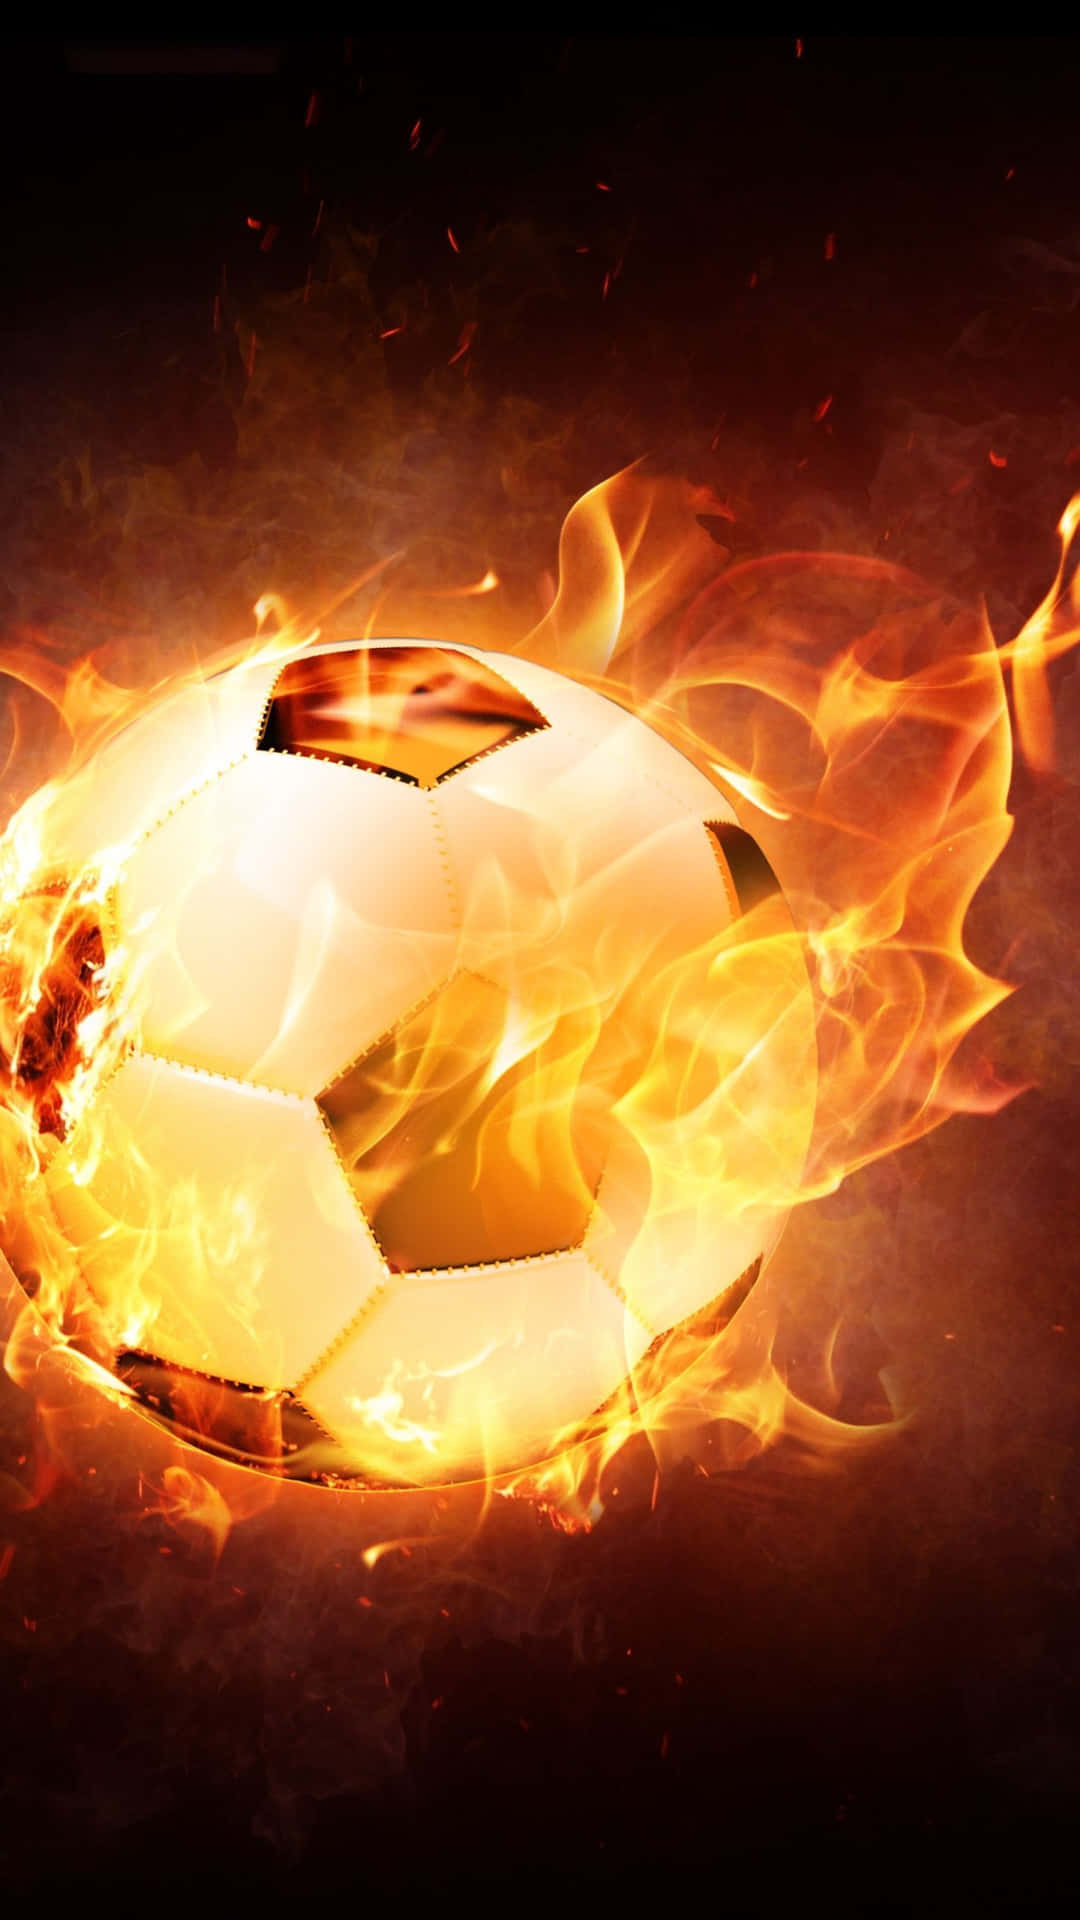 Score with Football On Fire Wallpaper